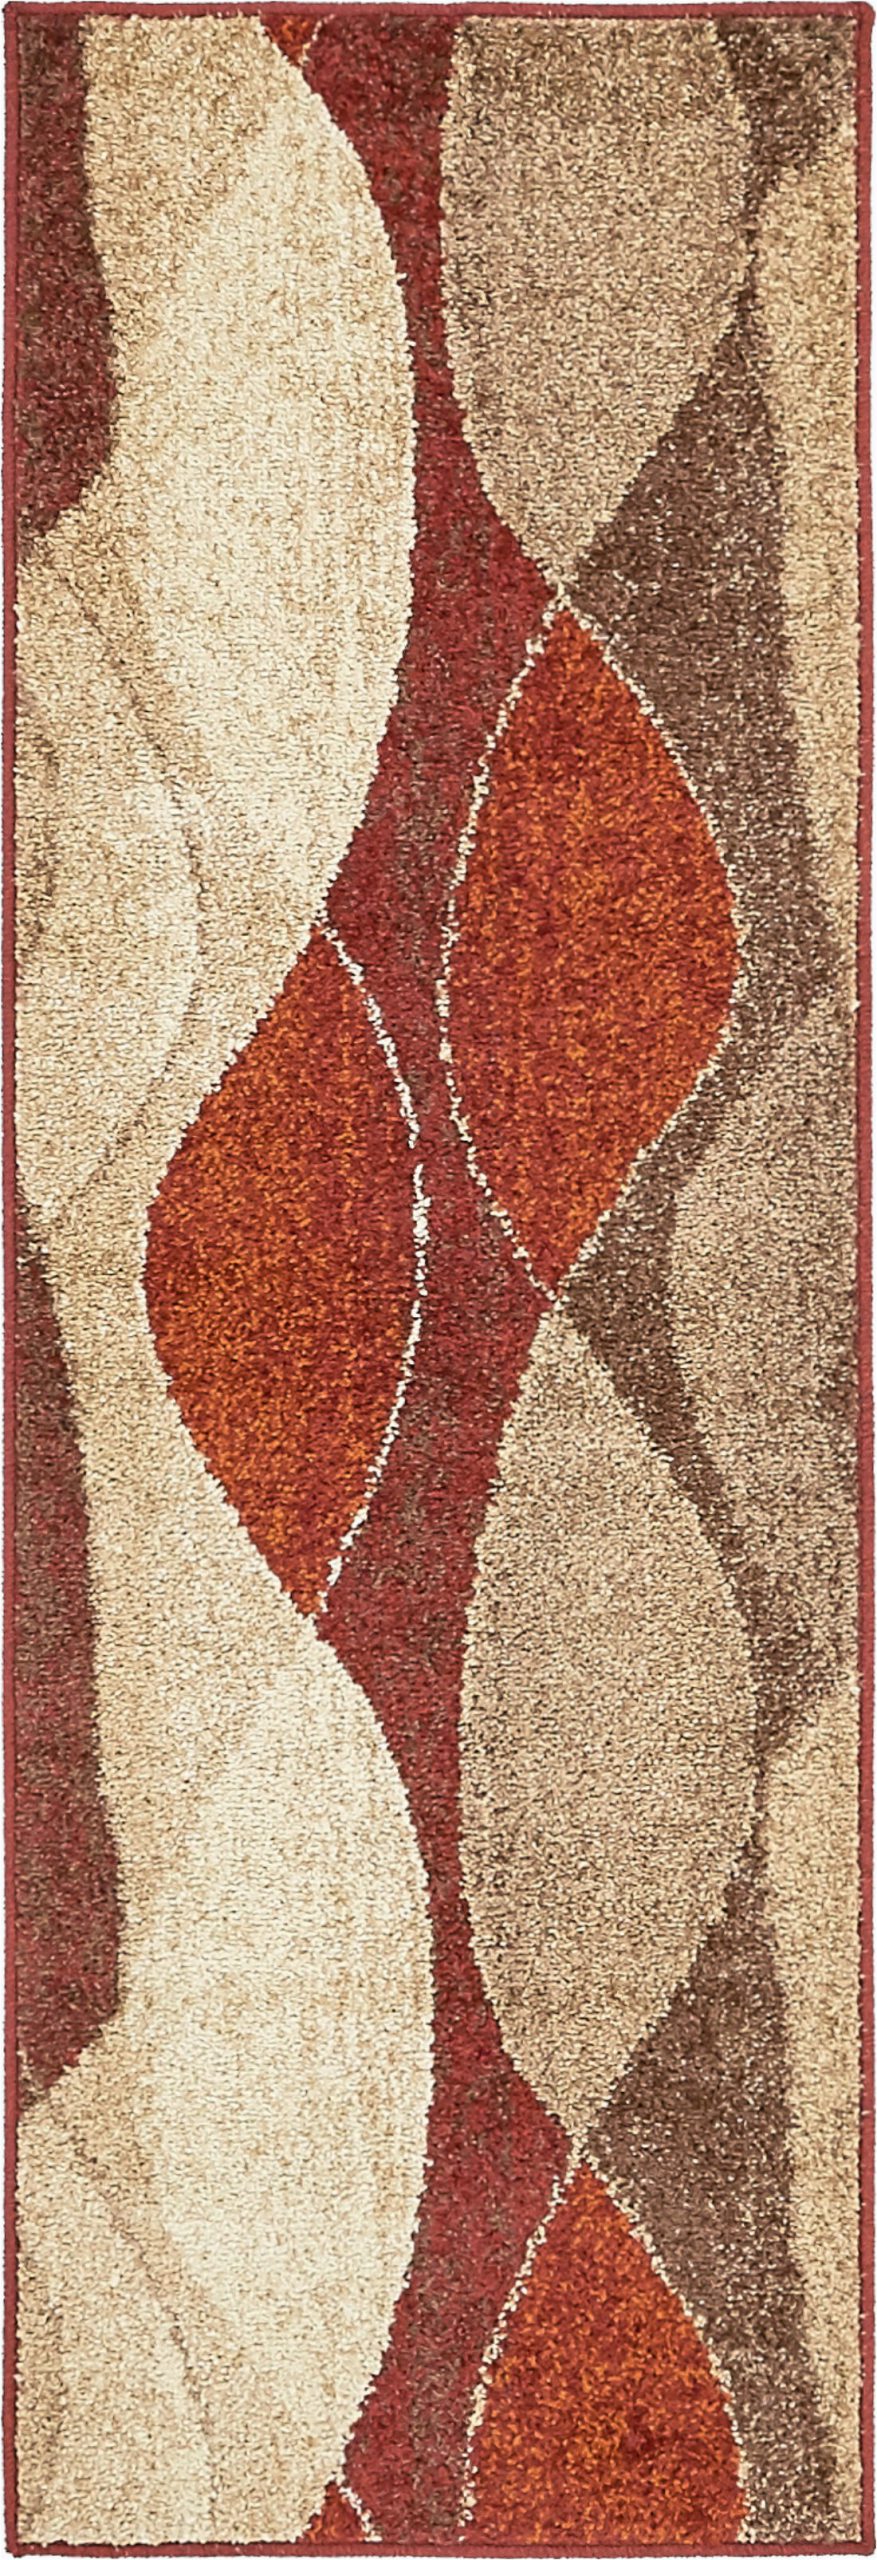 Qvc area Rugs On Easy Pay Abstract orange area Rugs You Ll Love In 2020